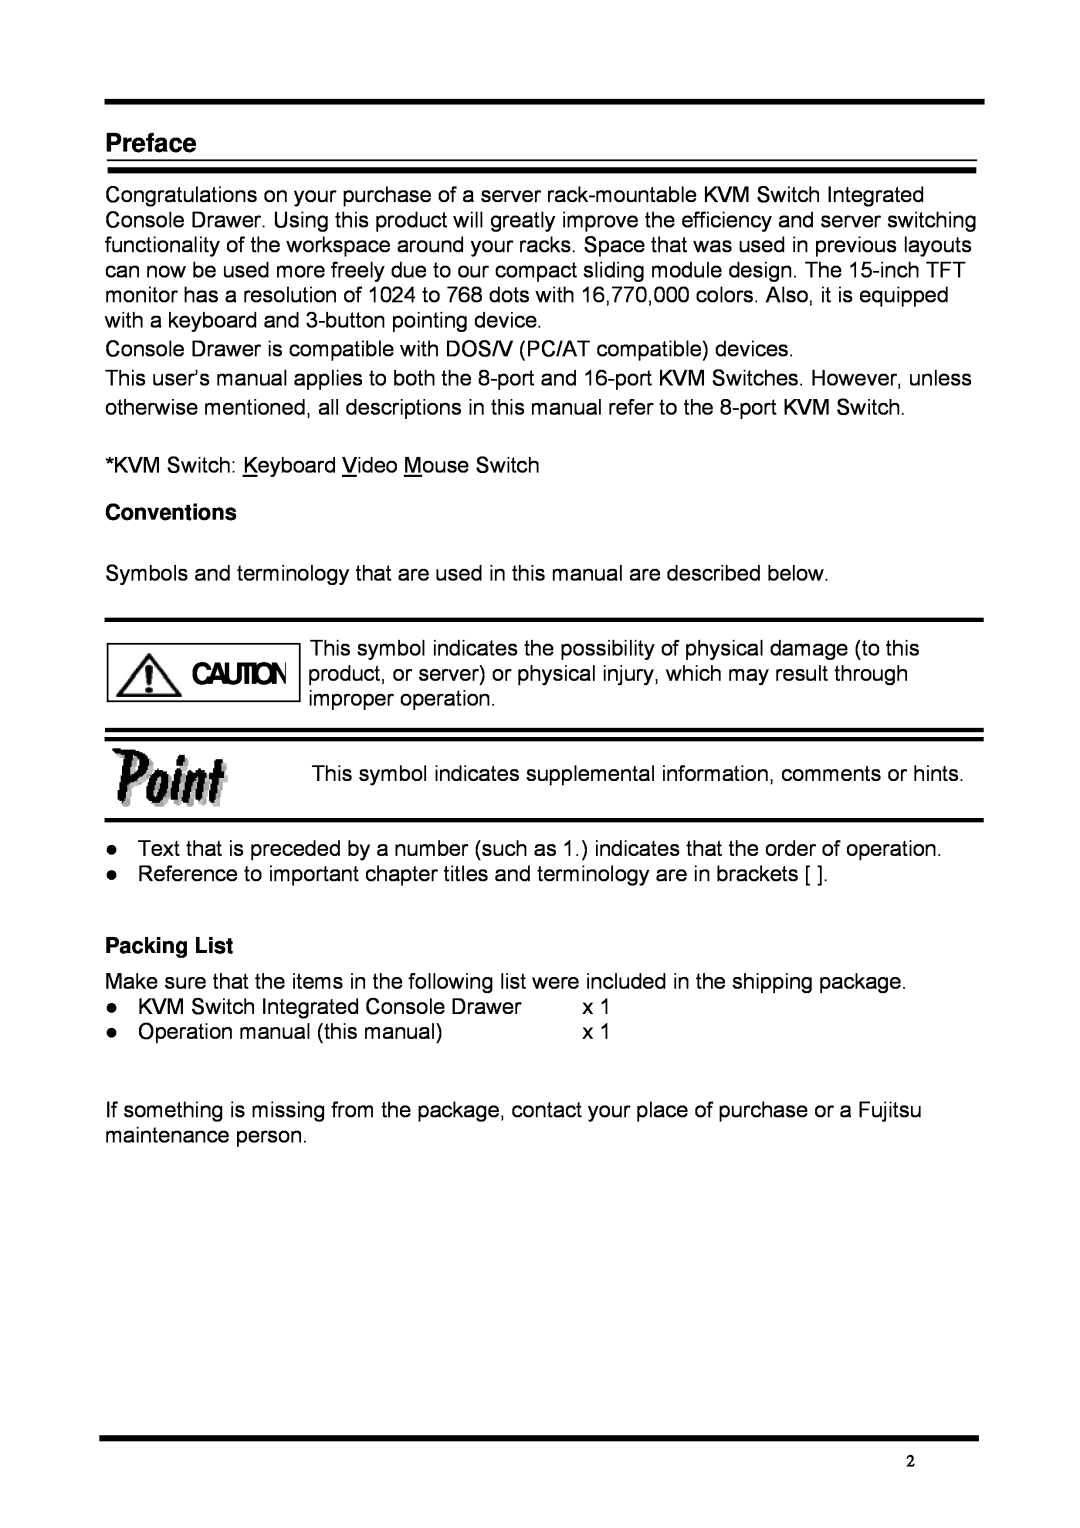 Fujitsu FD-1008AT, FD-1016AT user manual Preface, Conventions, Packing List 